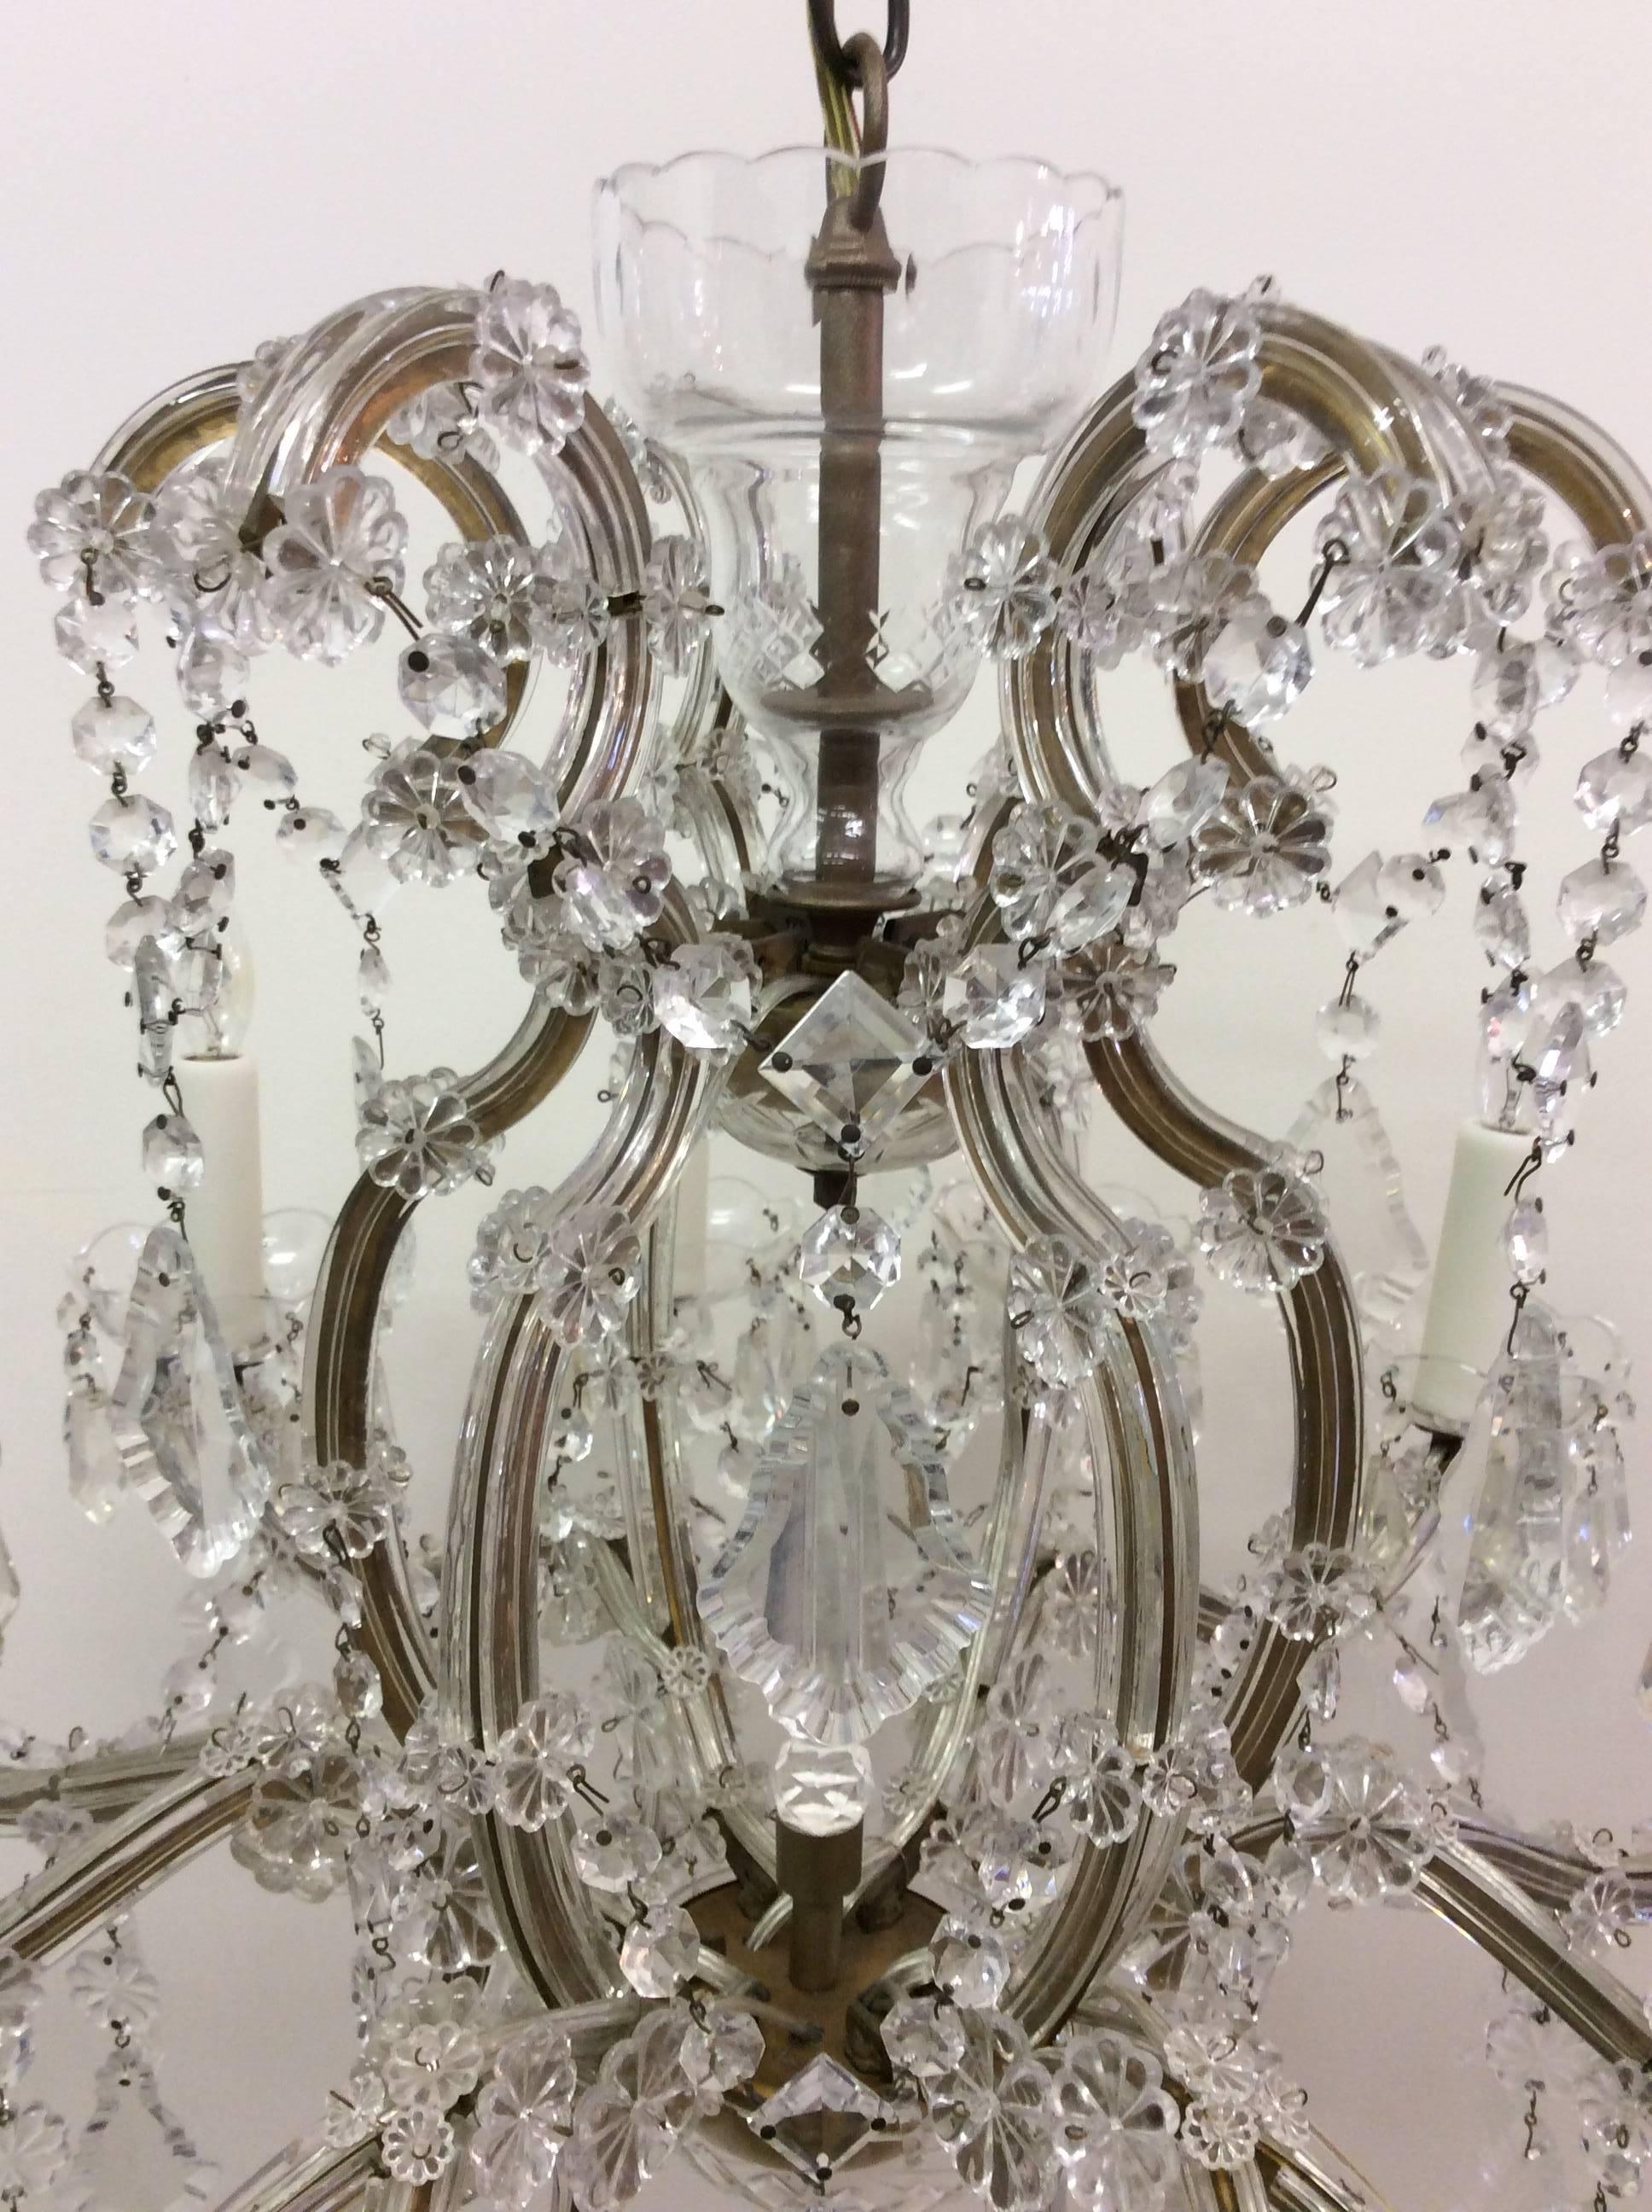 Antique Maria Theresa Crystal Chandelier In Excellent Condition For Sale In Mobile, AL